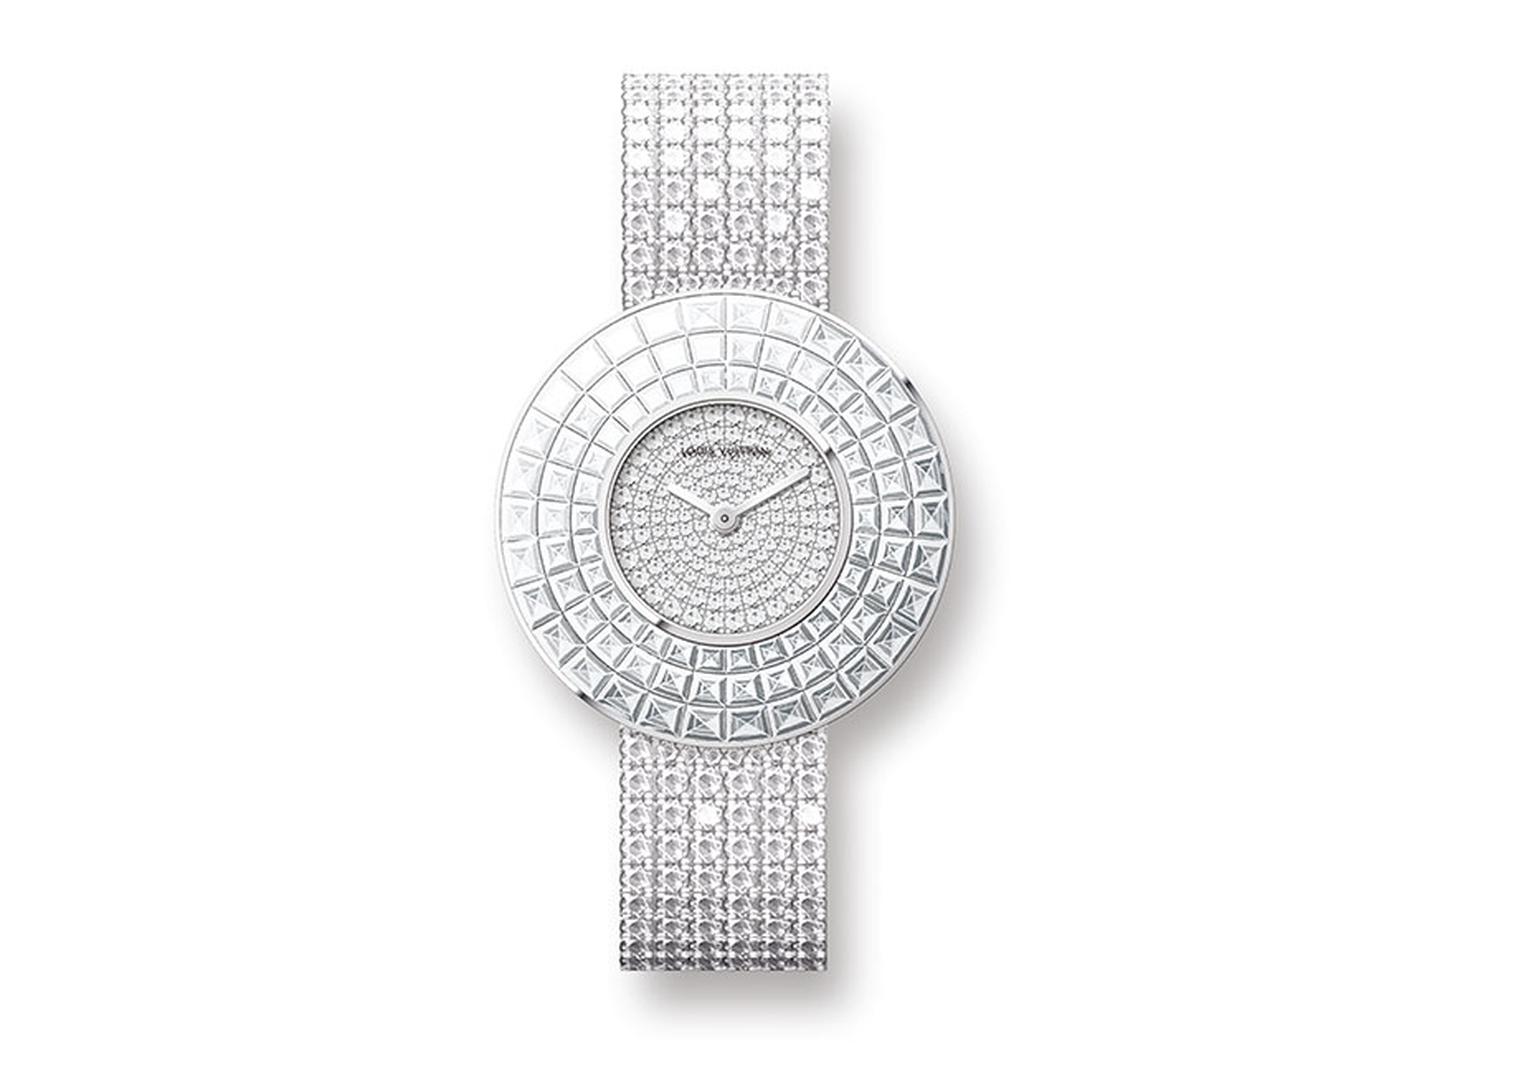 Louis Vuitton white gold Damier Absolu Rivière jewellery watch featuring brilliant-cut diamonds on the dial and bracelet and three rows of invisible set baguette-cut diamonds on the bezel